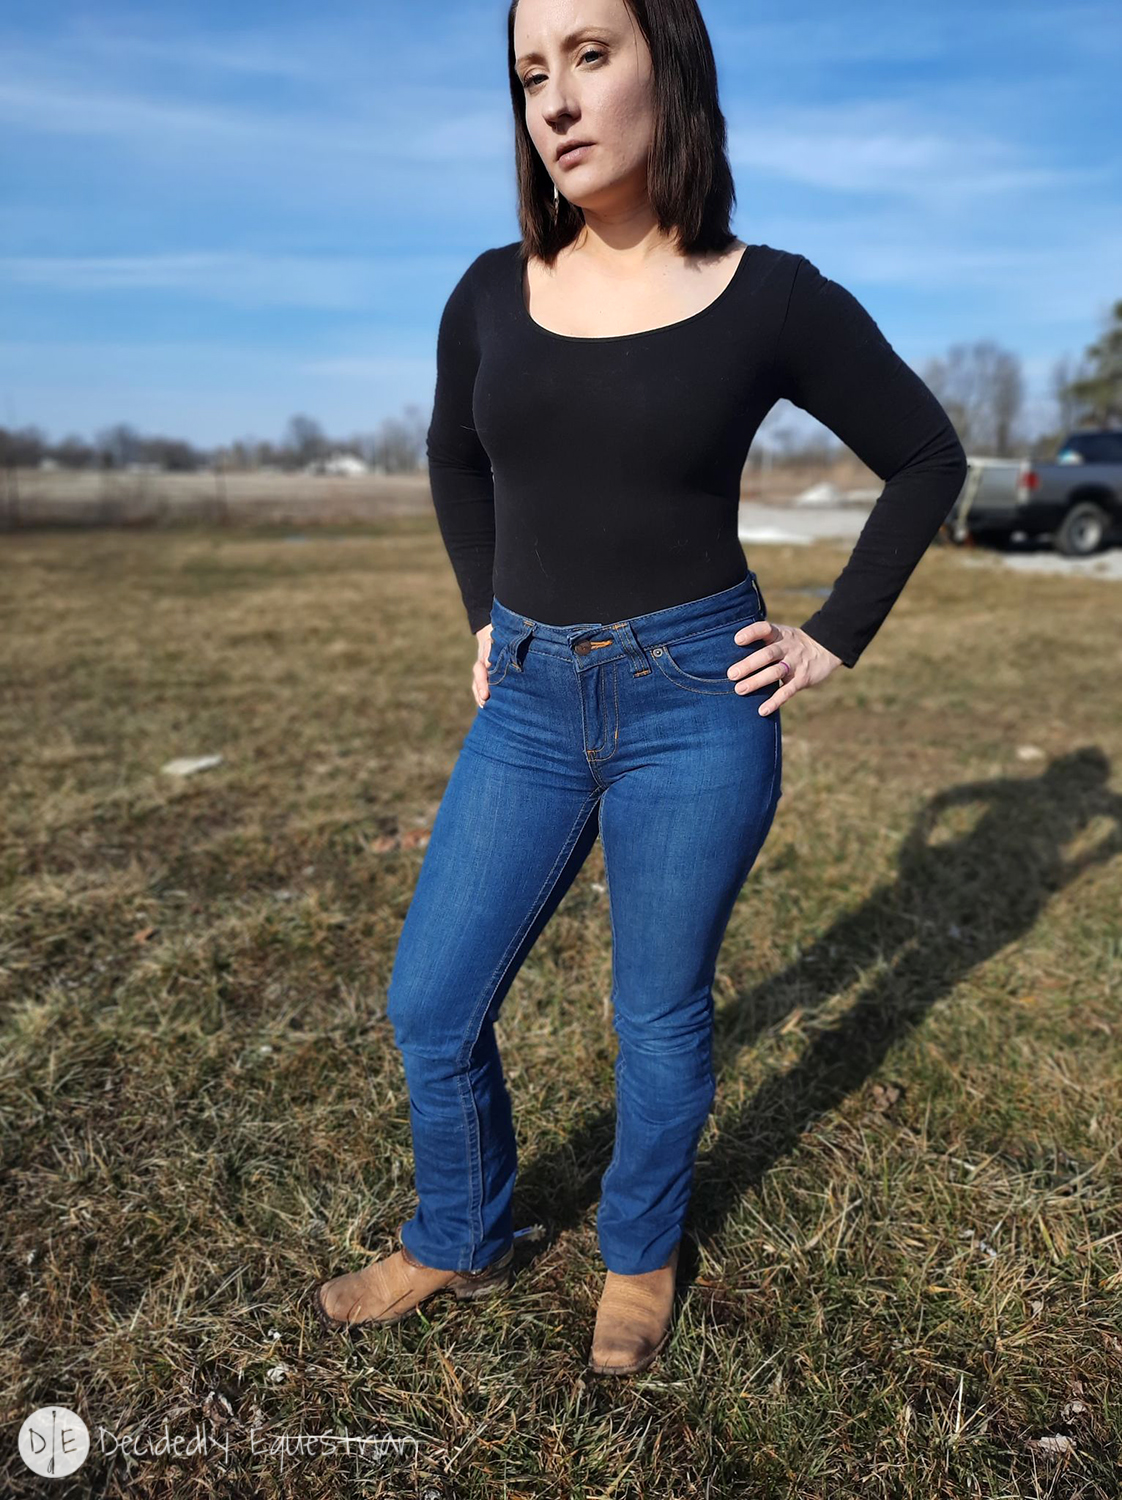 Kimes Ranch Jeans Product Review